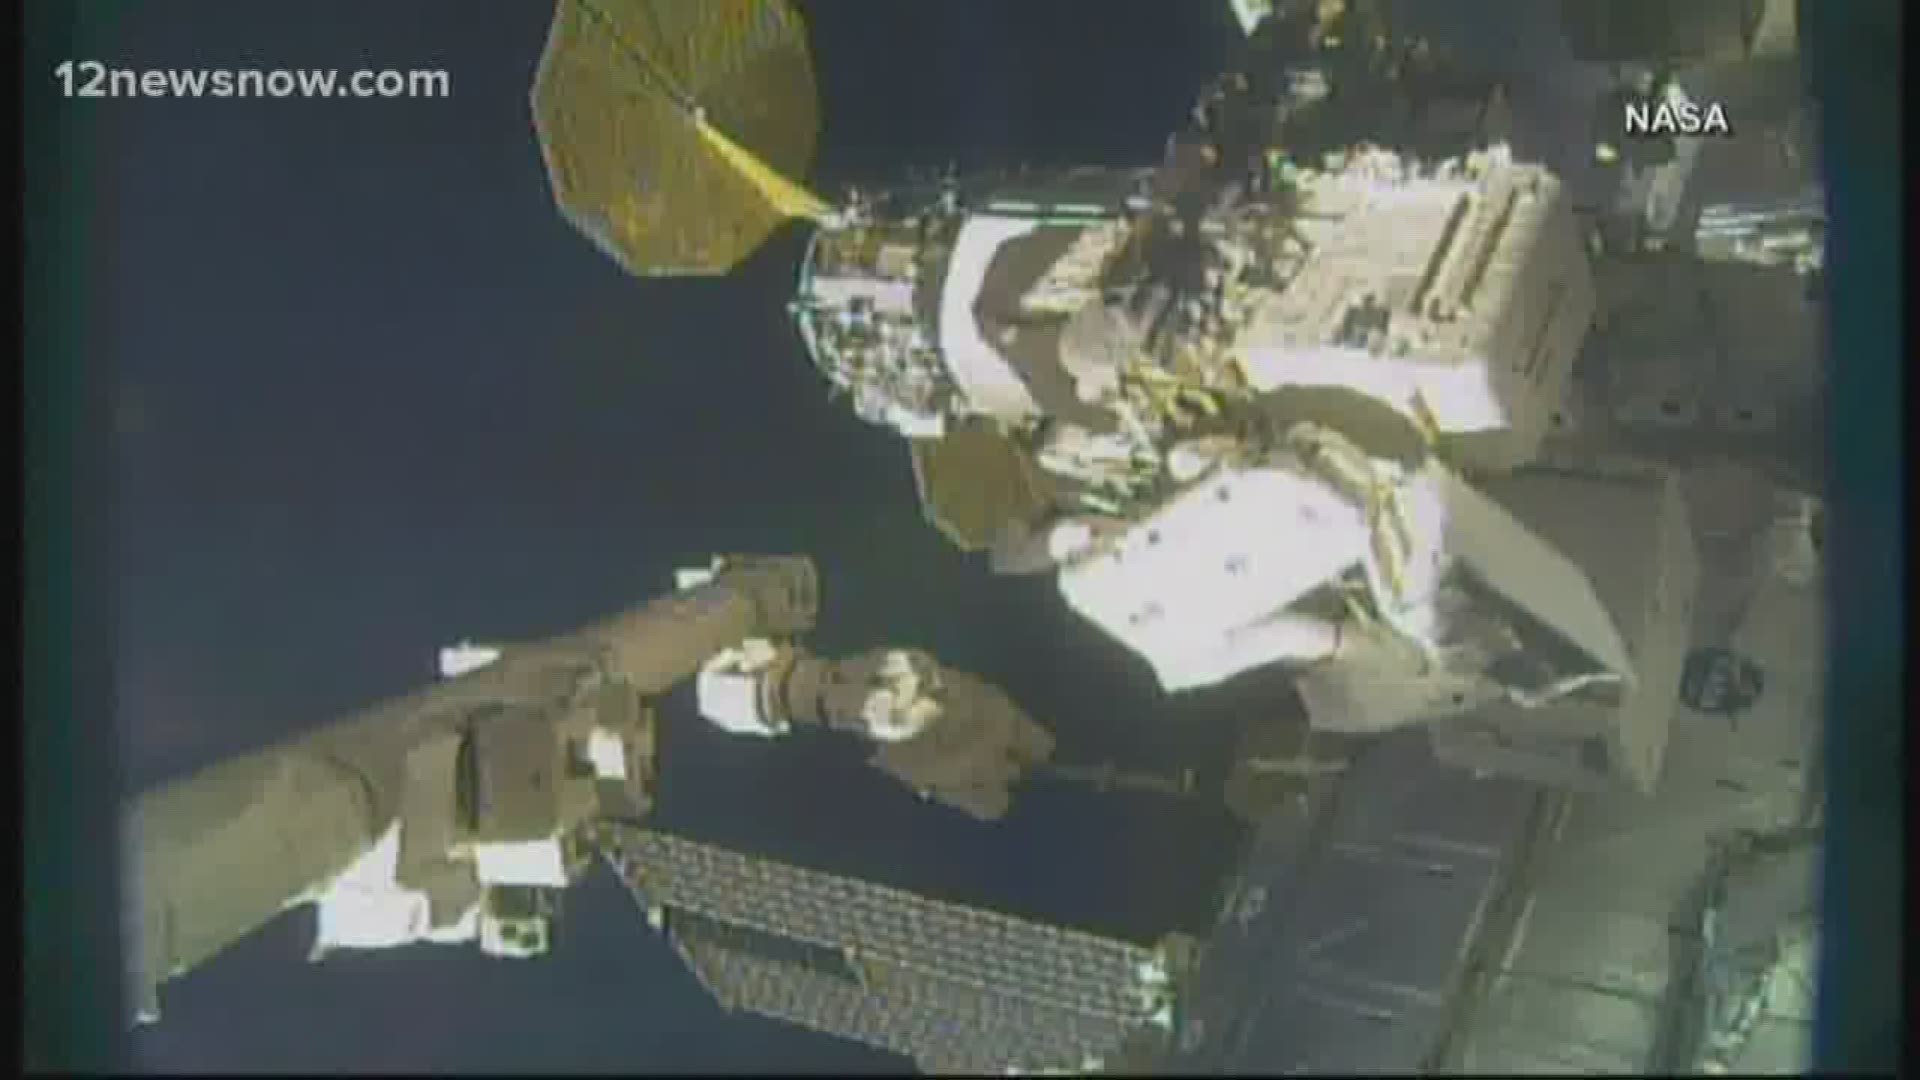 Astronauts on board the International Space Station continued their work this morning on the station's cosmic ray detector. This is the third spacewalk in 3 weeks.